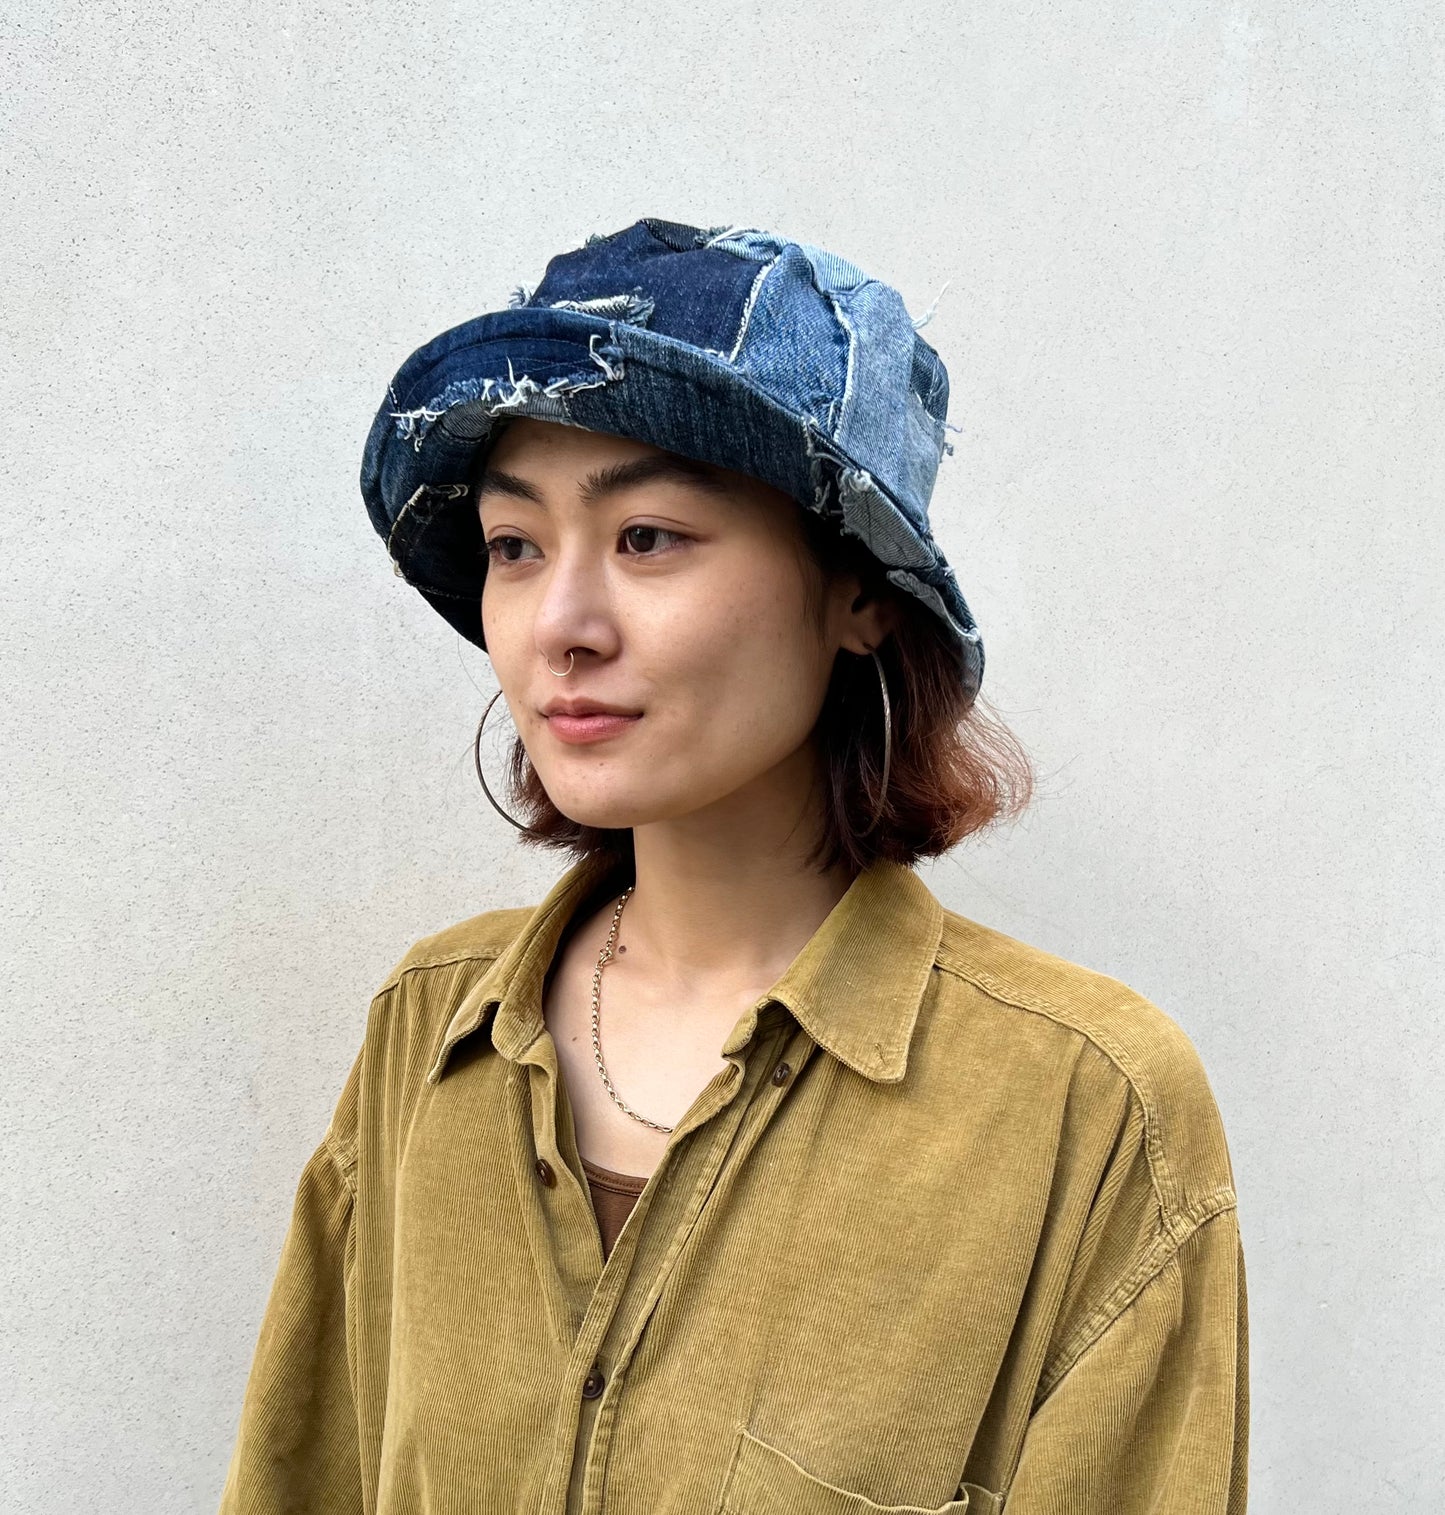 Patched Big Bucket Hat Blue